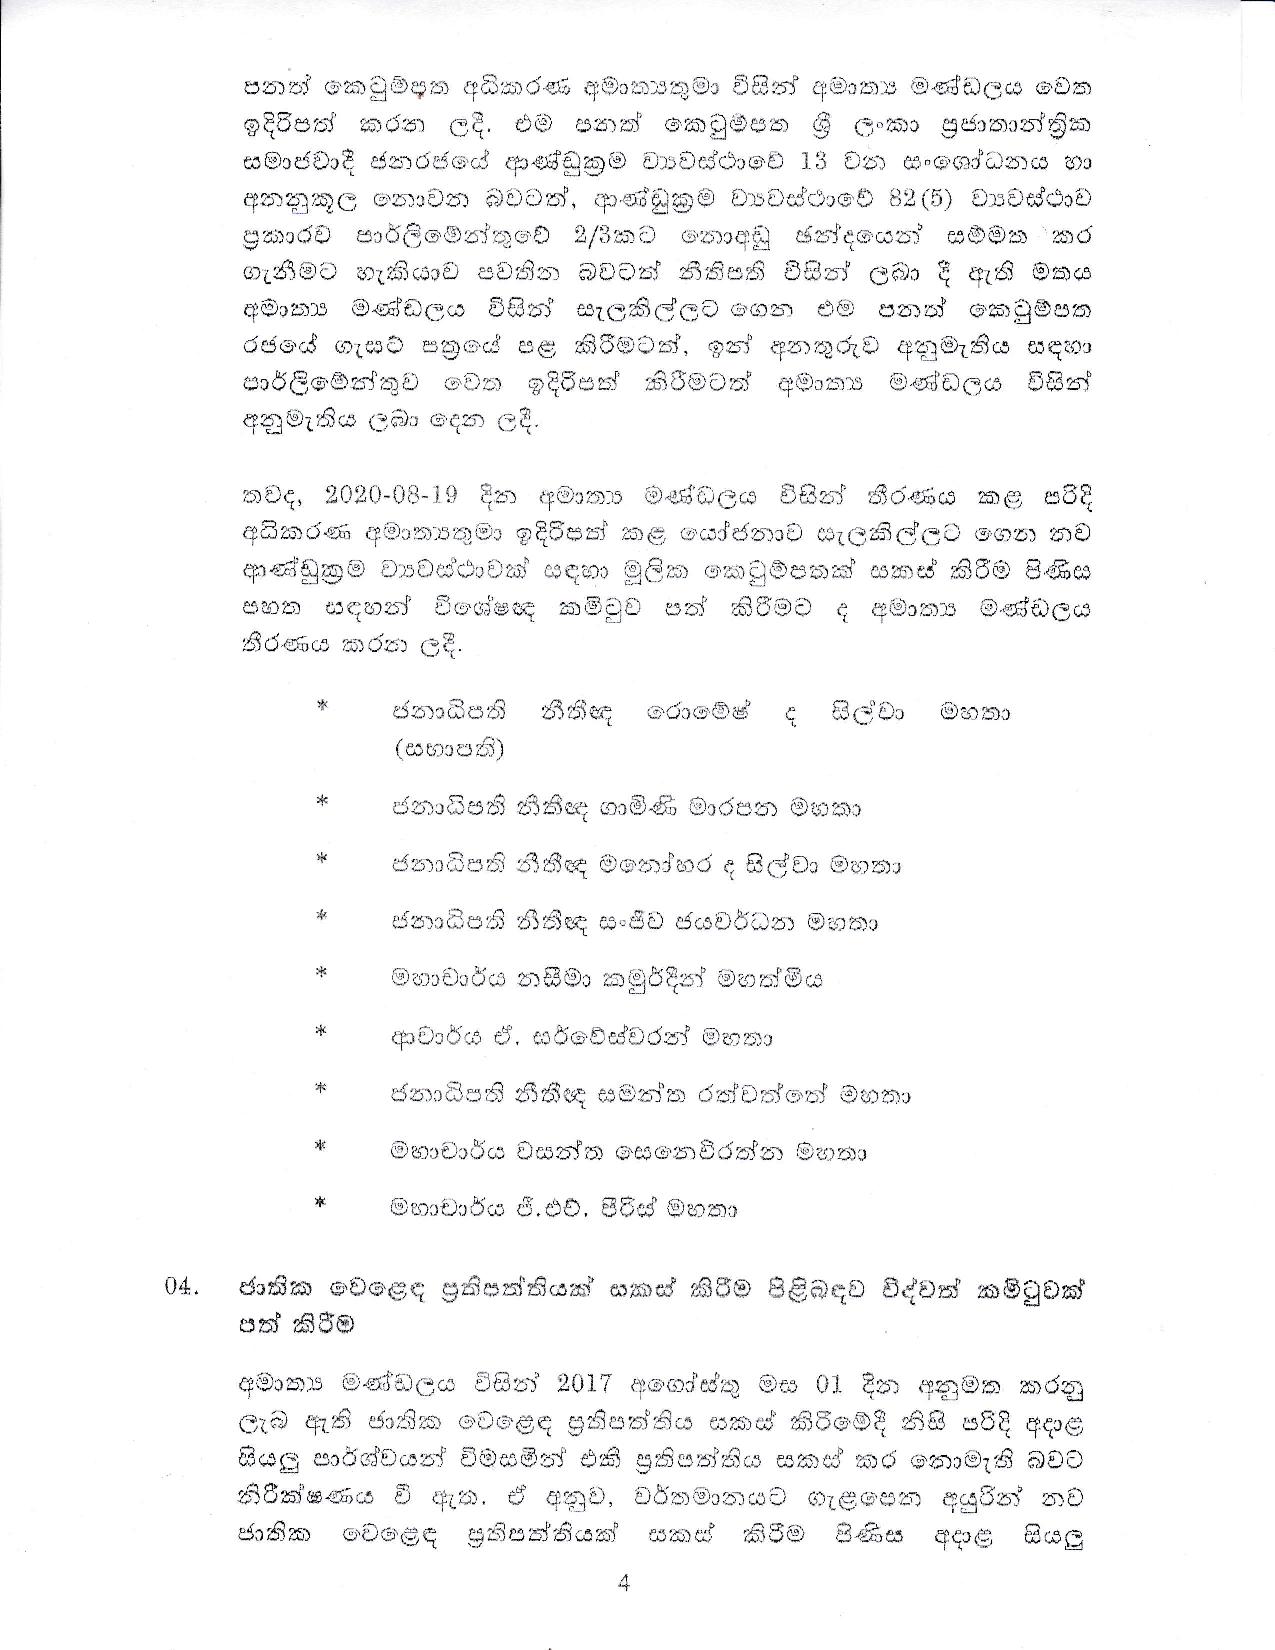 Cabinet decision on 02.09.2020 page 004